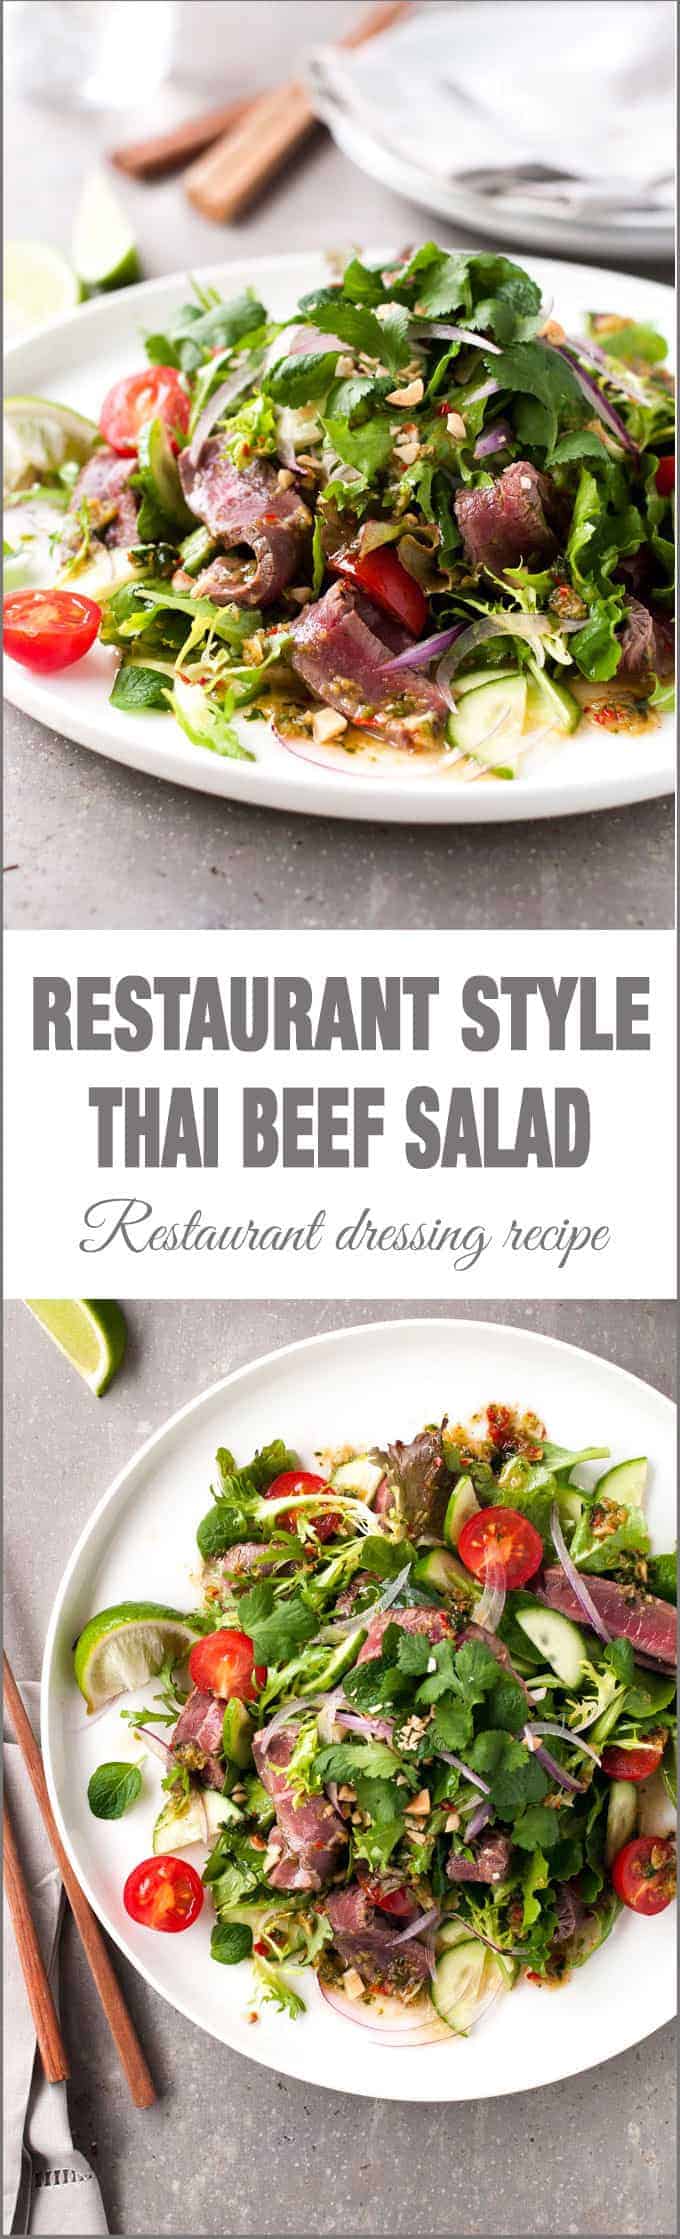 Thai Beef Salad (Restaurant Style) - one little change to the usual recipe to make a restaurant quality Thai Beef Salad